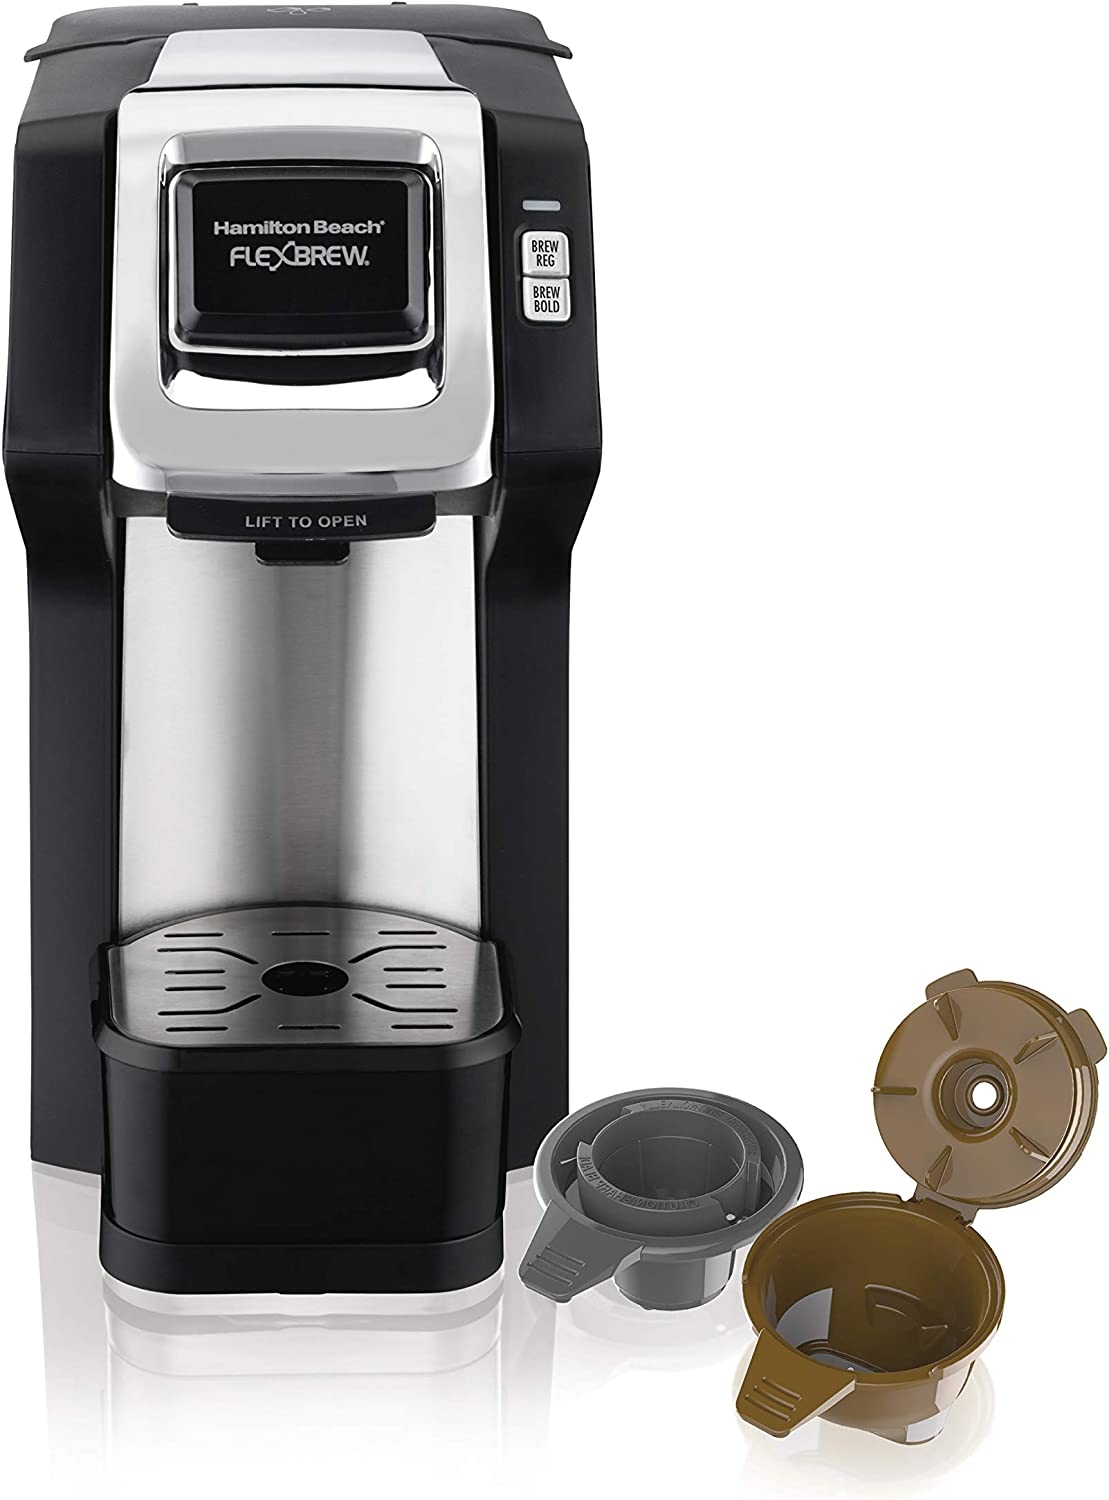 Hamilton Beach 49900 FlexBrew Single-Serve Coffee Maker Compatible with Pod Packs and Grounds, Black-Fast Brewing Import To Shop